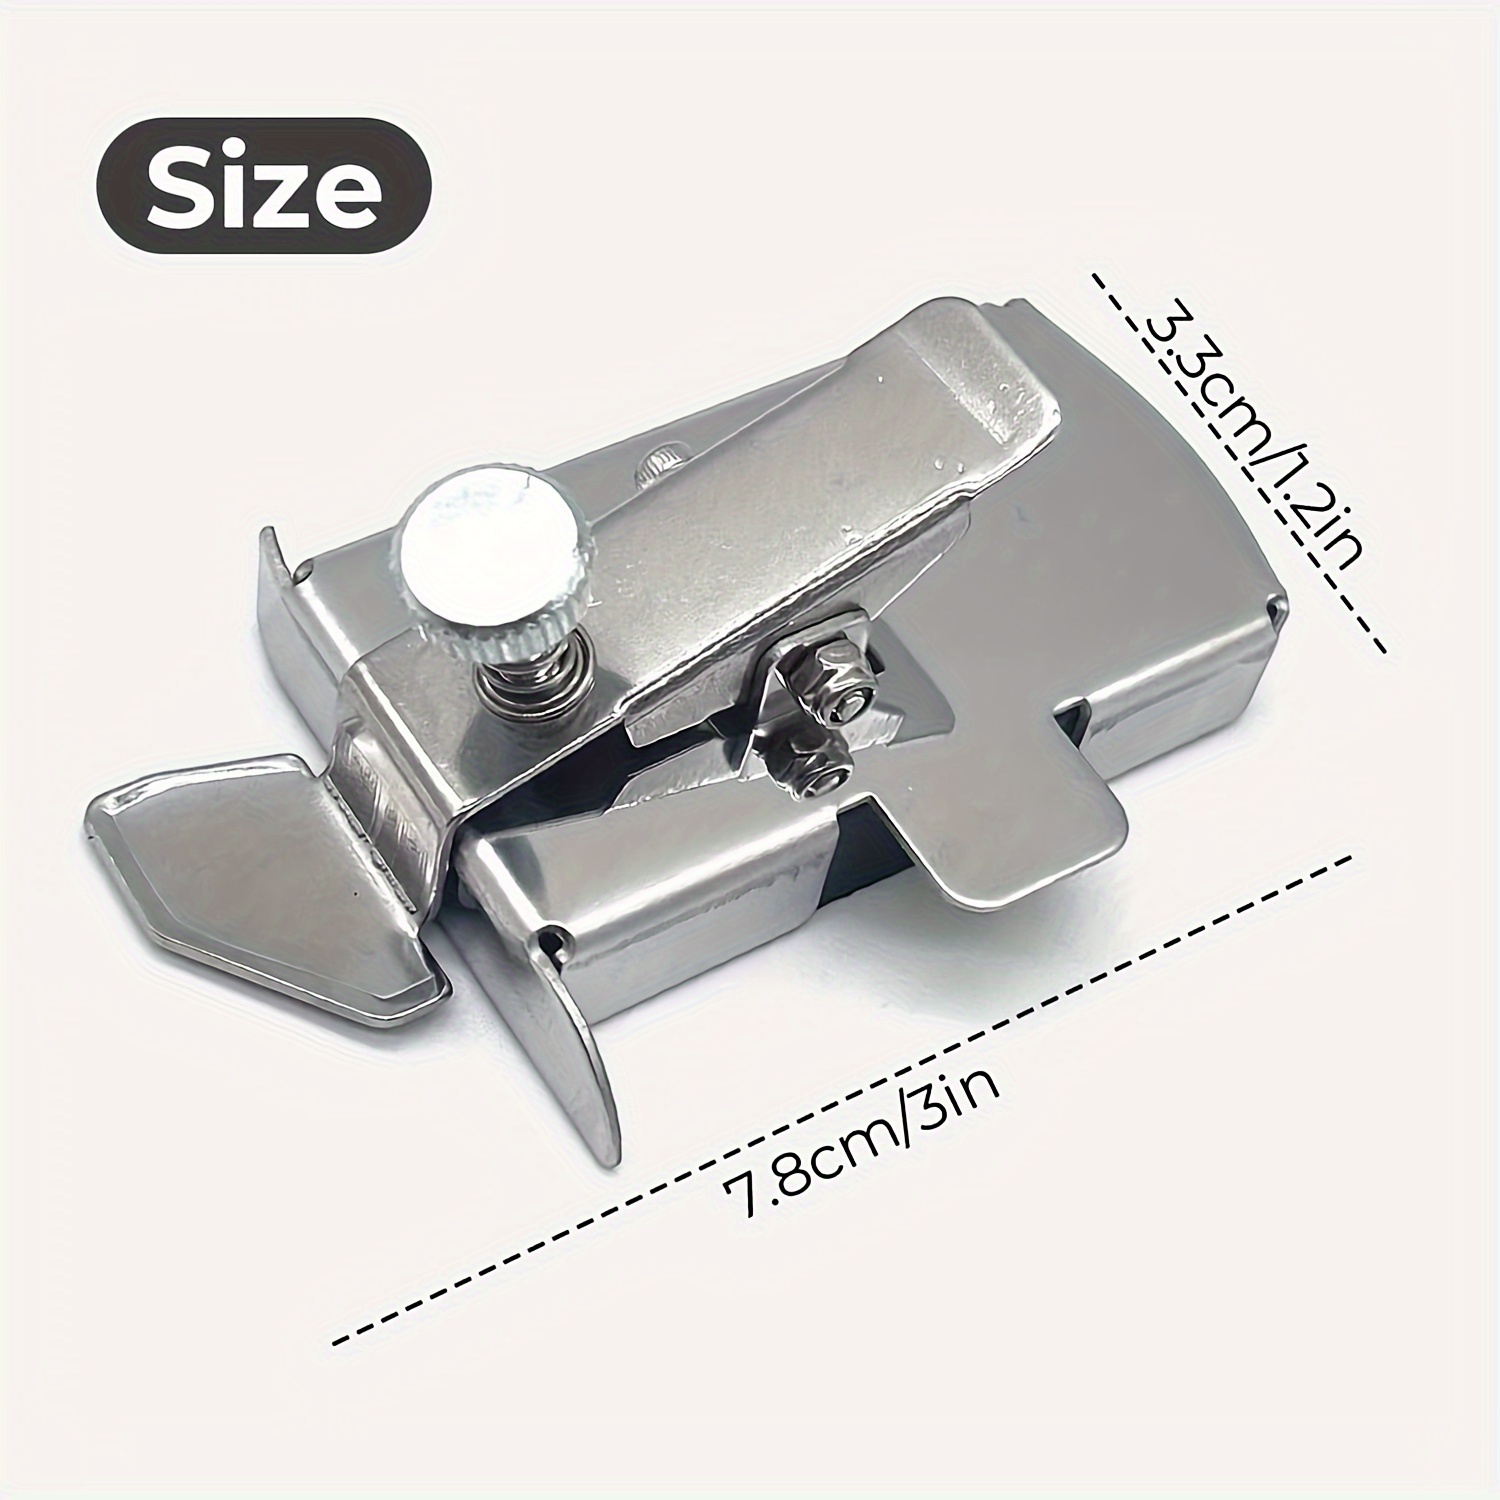 New Magnetic Seam Guide Sewing Machine Hemmer Multifunctional